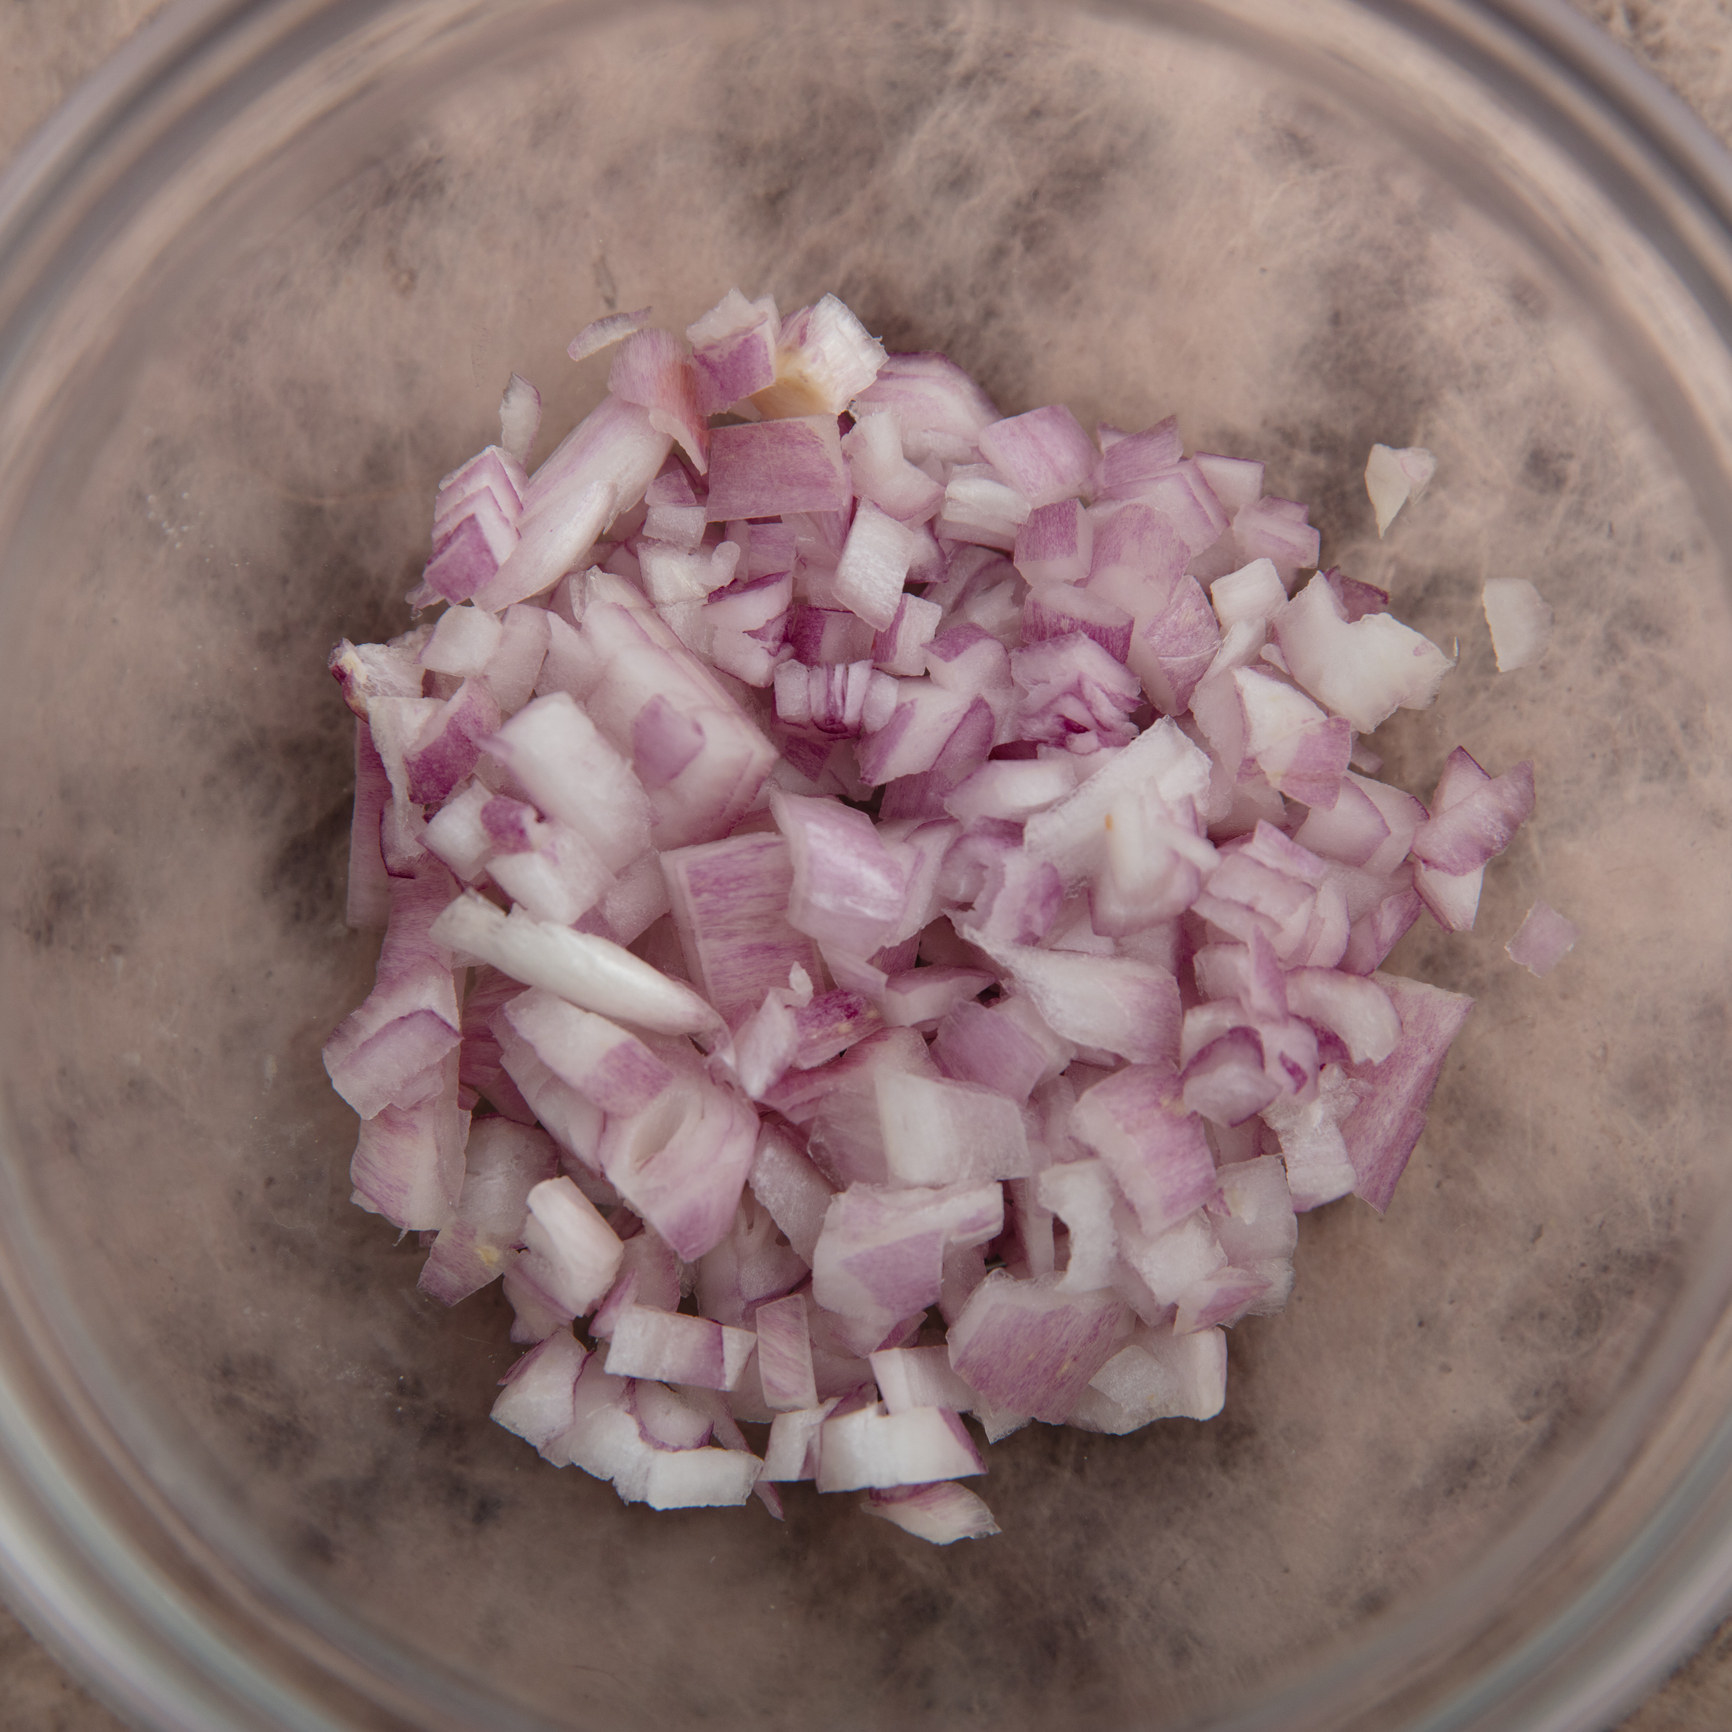 Chopped shallots in a bowl.